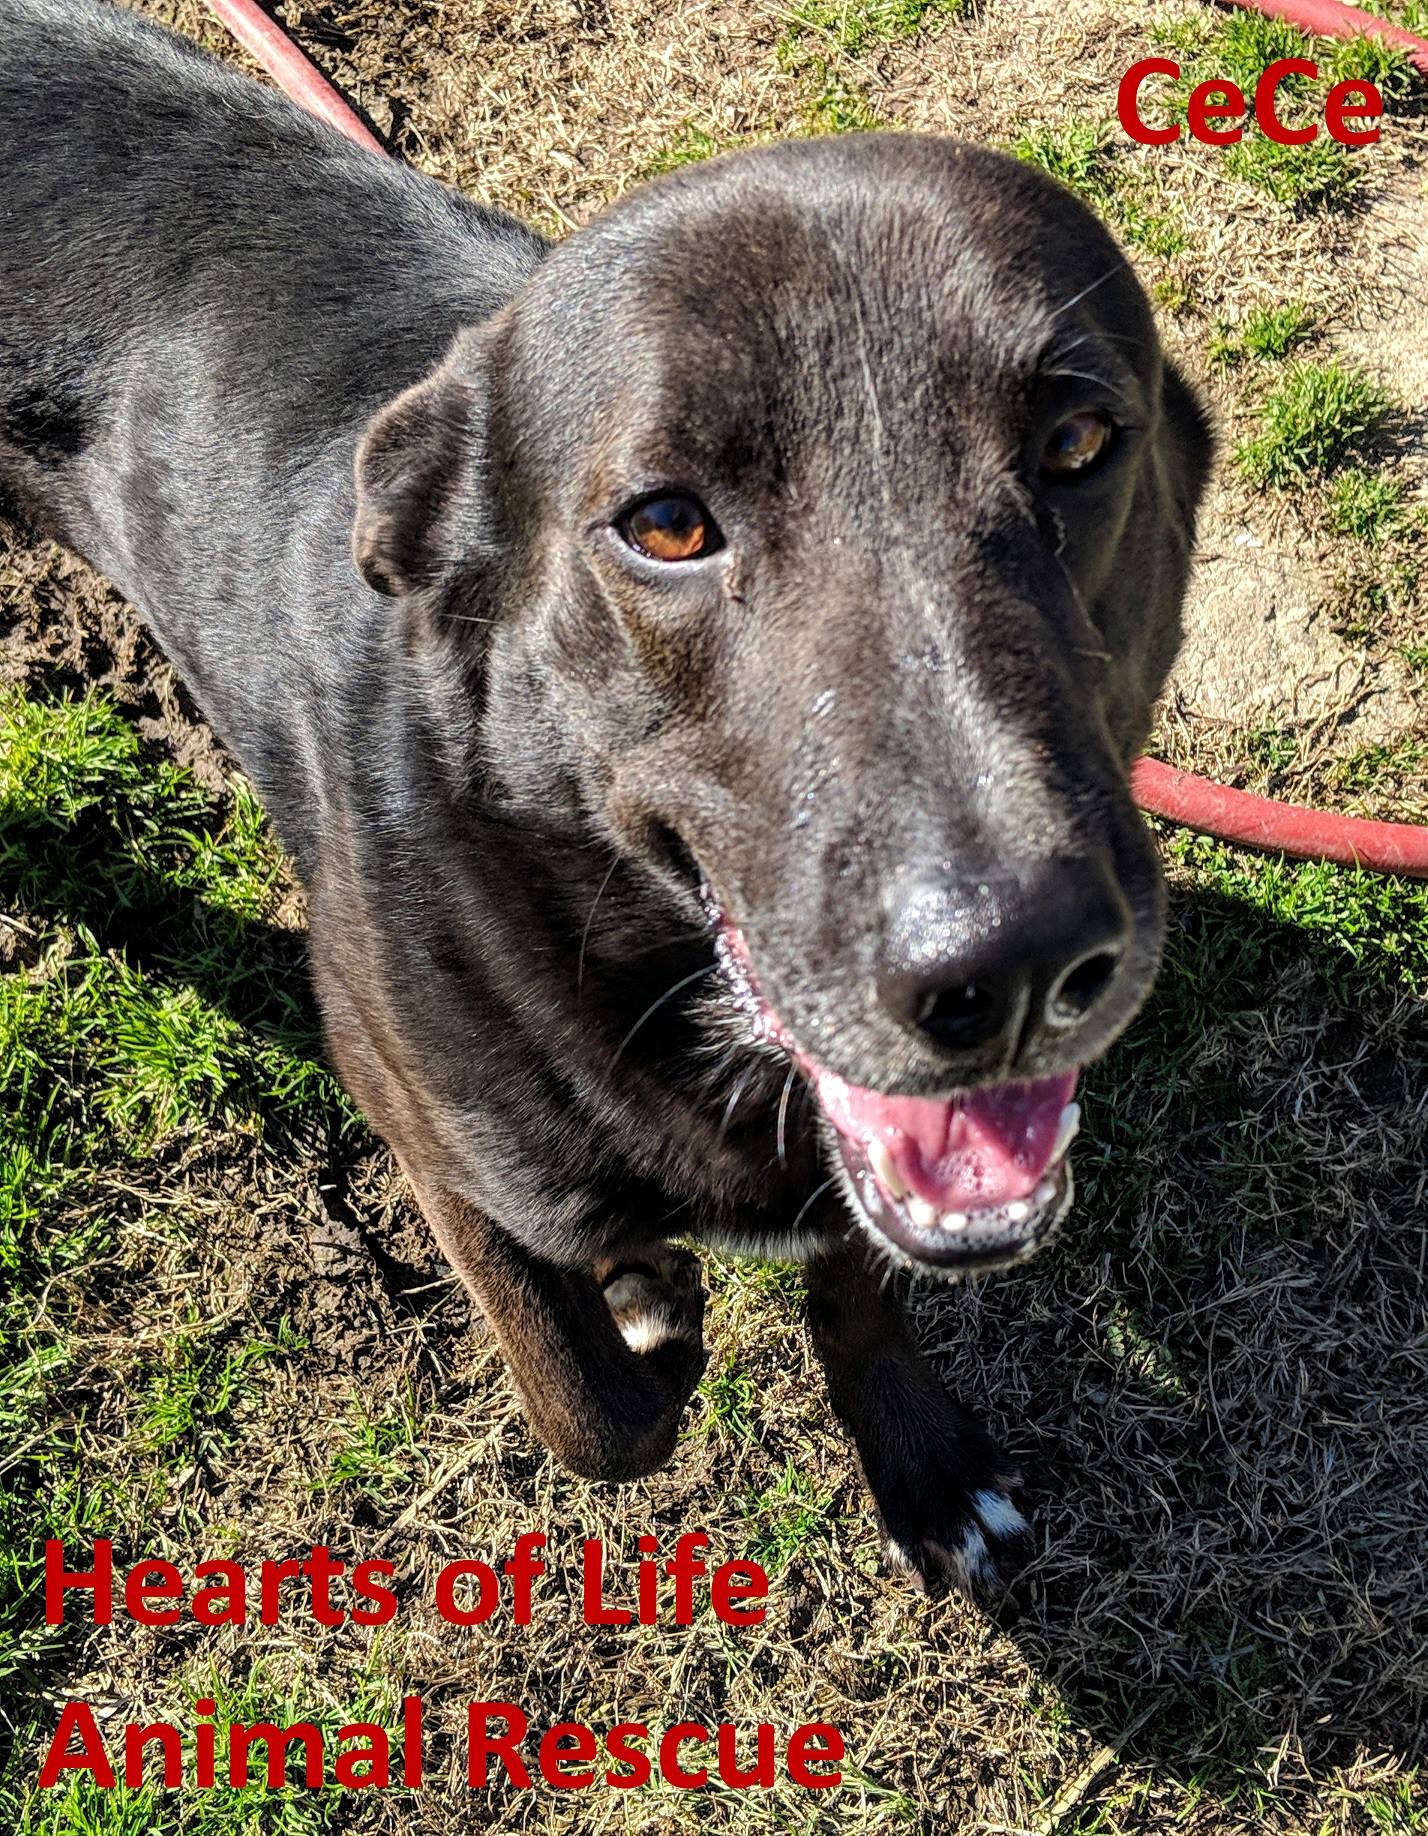 Hearts of Life Animal Rescue Dog of the Week: Meet CeCe!